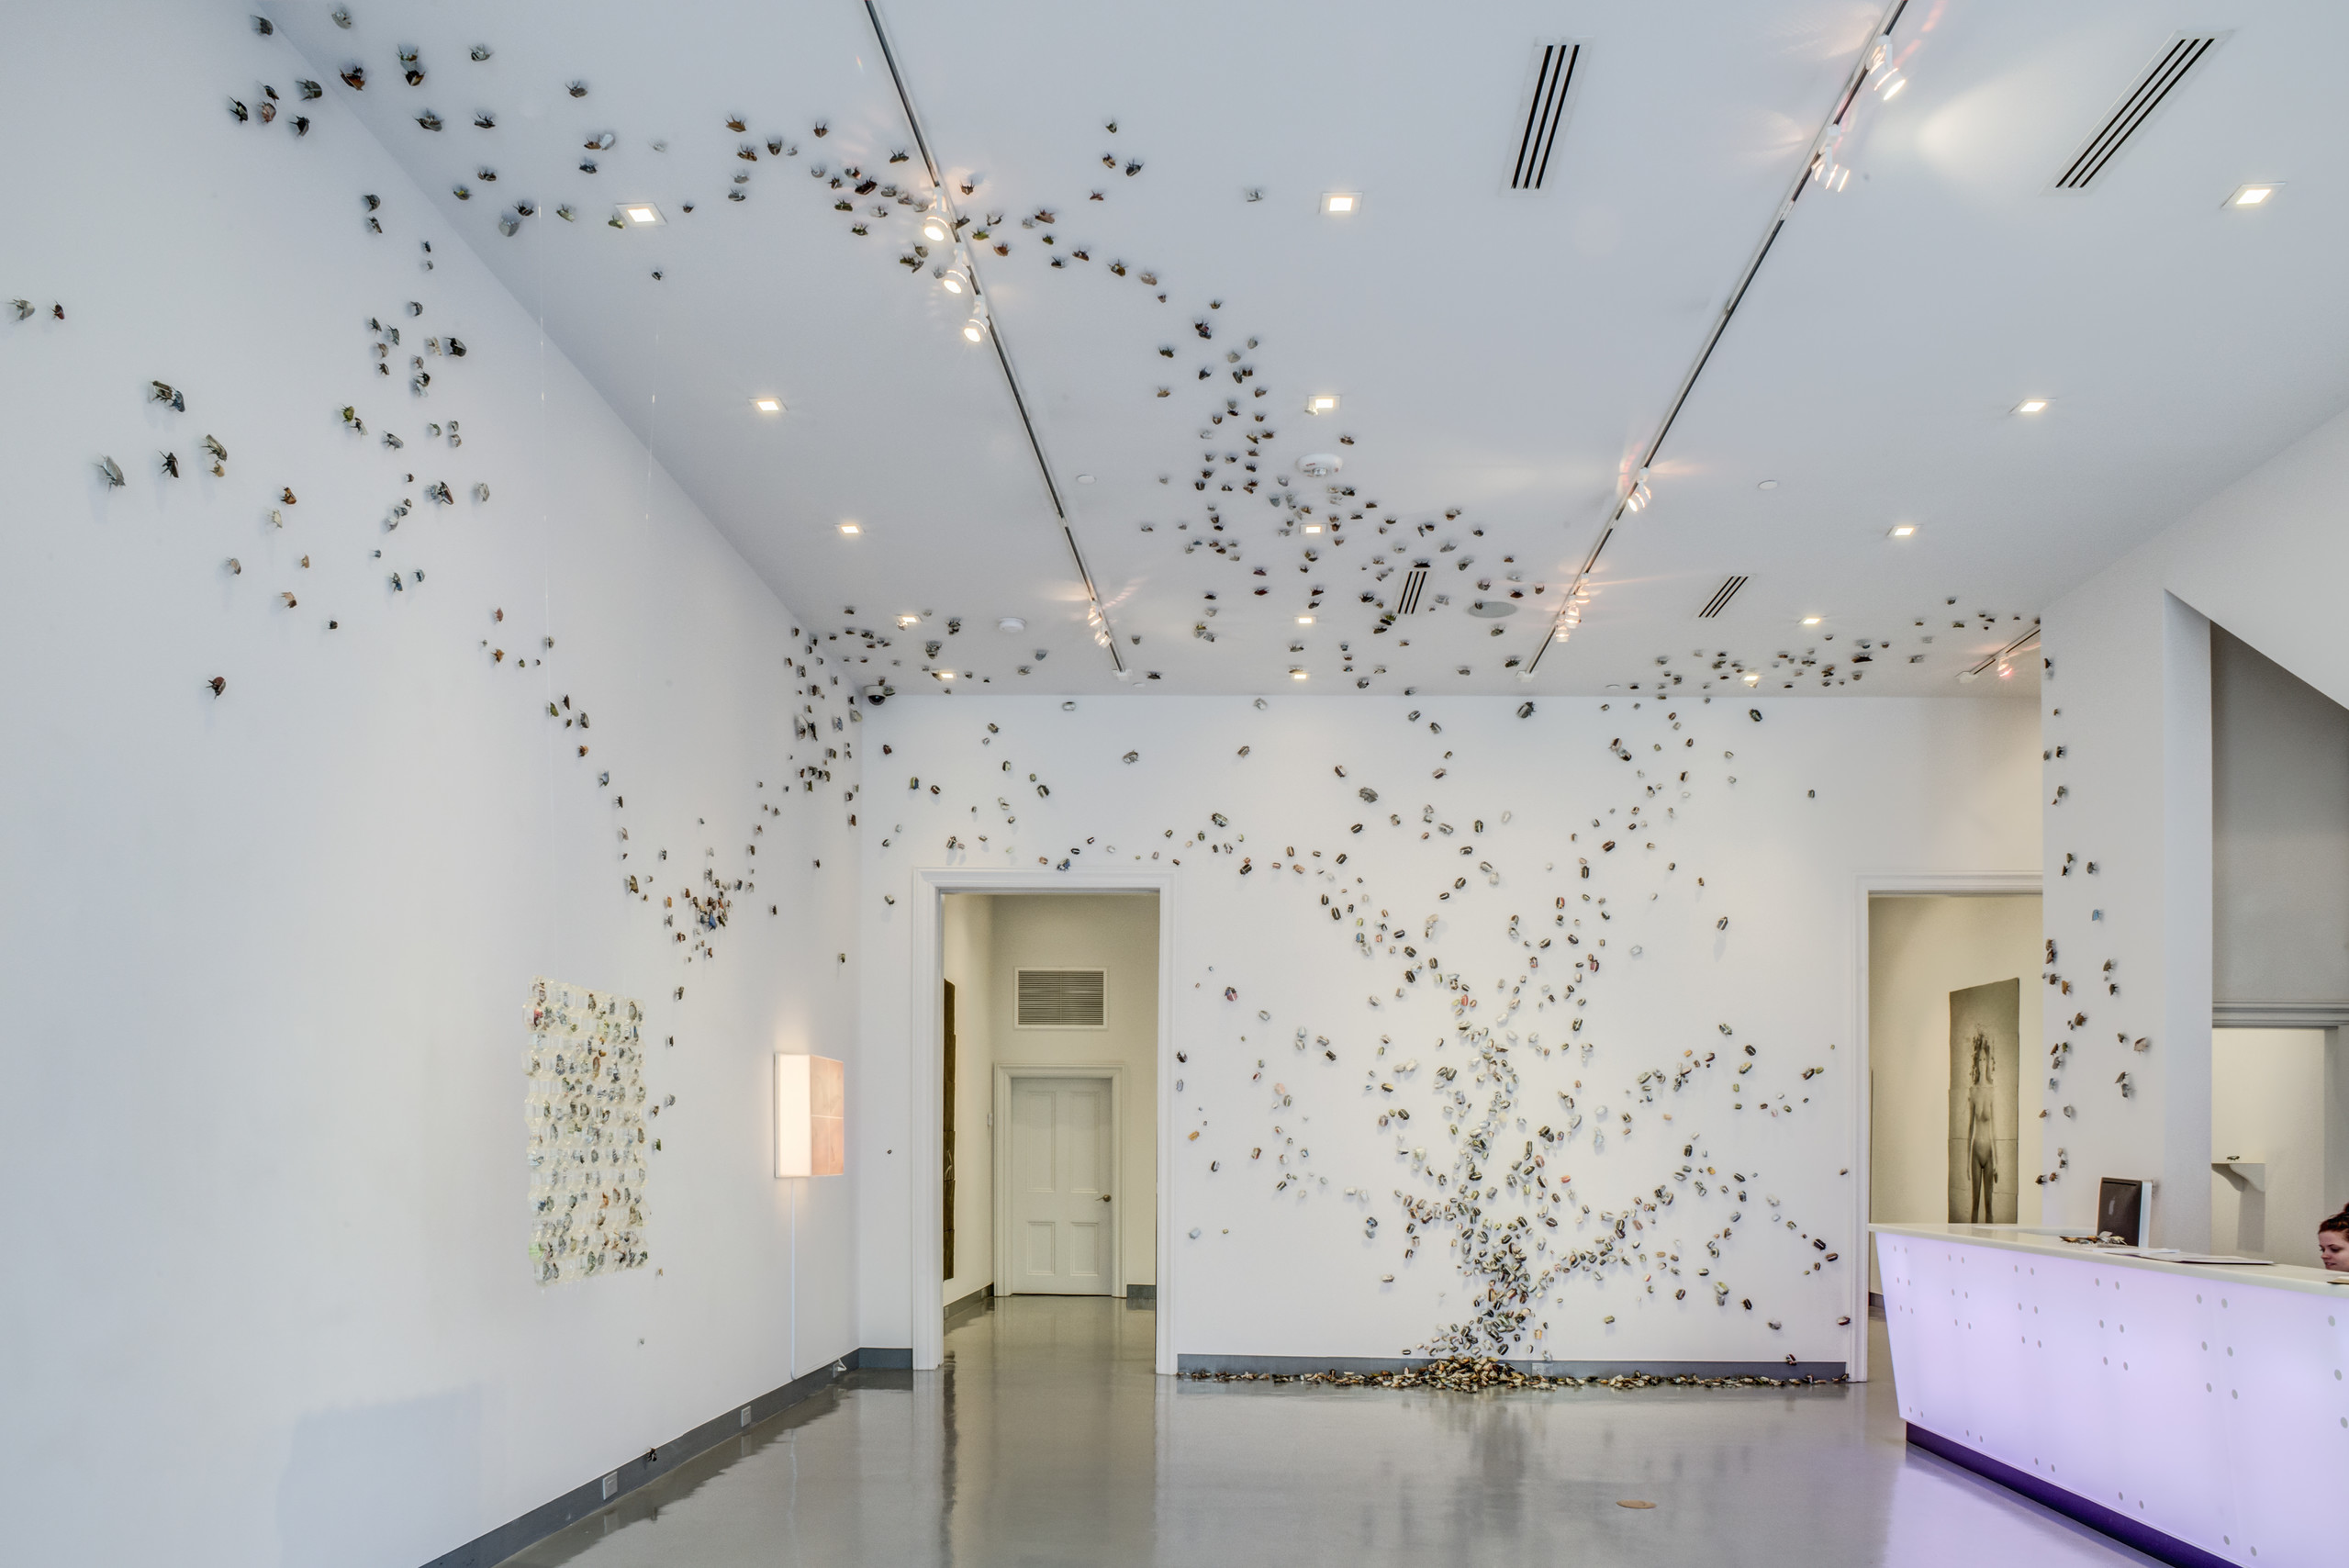 Installation view of thousands of small insects swarming out on the walls, ceiling, and onto the floor of a building lobby.